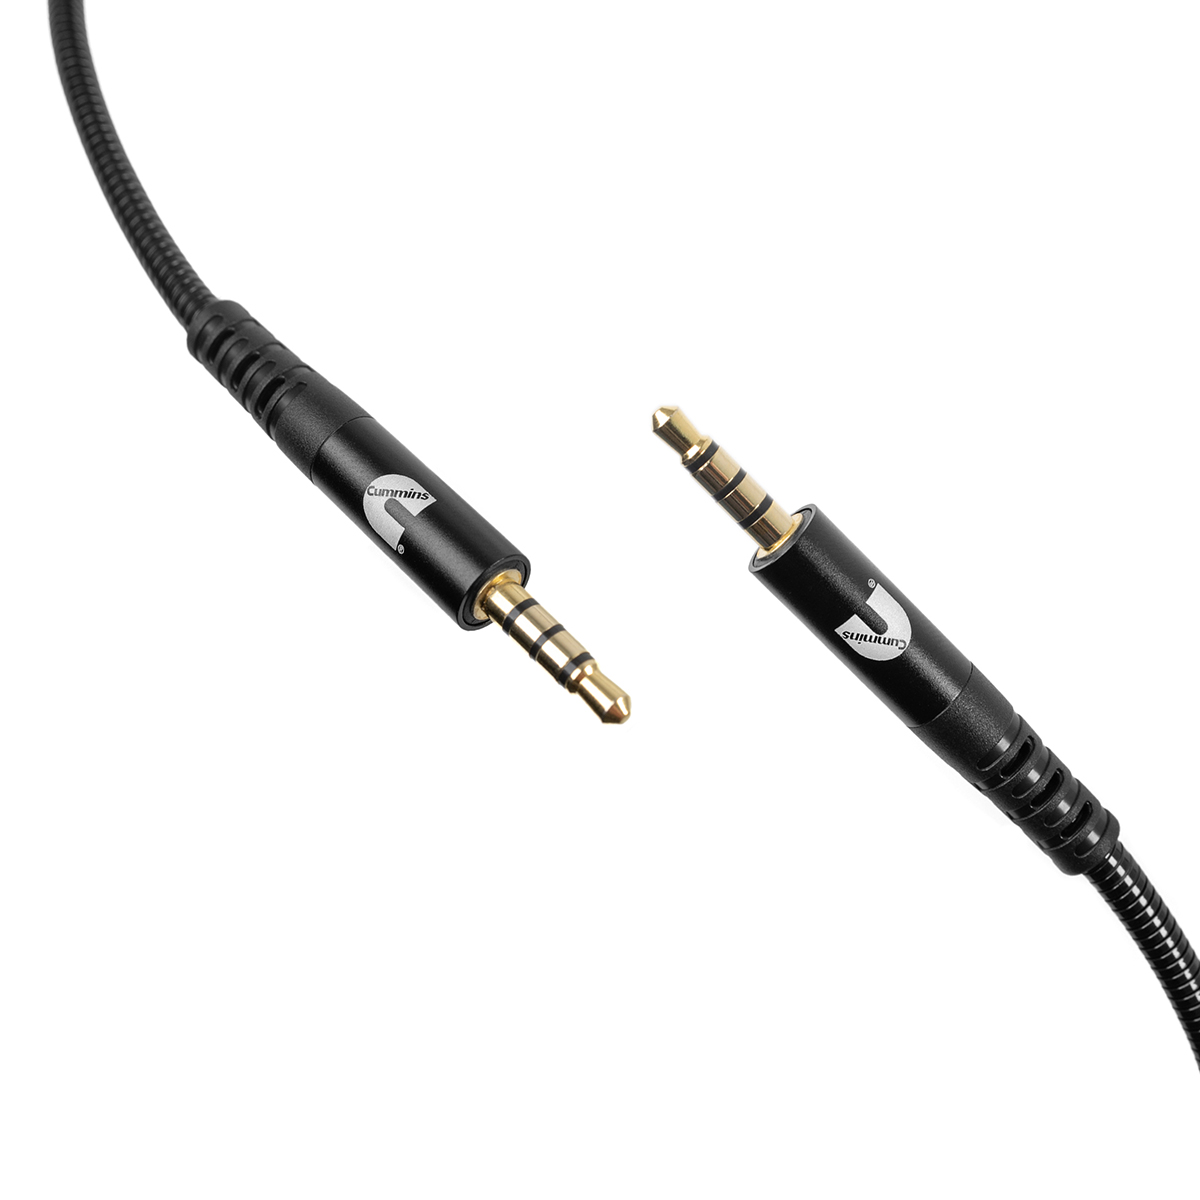 Cummins Aux to Aux Cable CMN4716 for Audio Stereo Connect with Wrap Attachment 3.5mm Male to Male Aux - 4 Feet